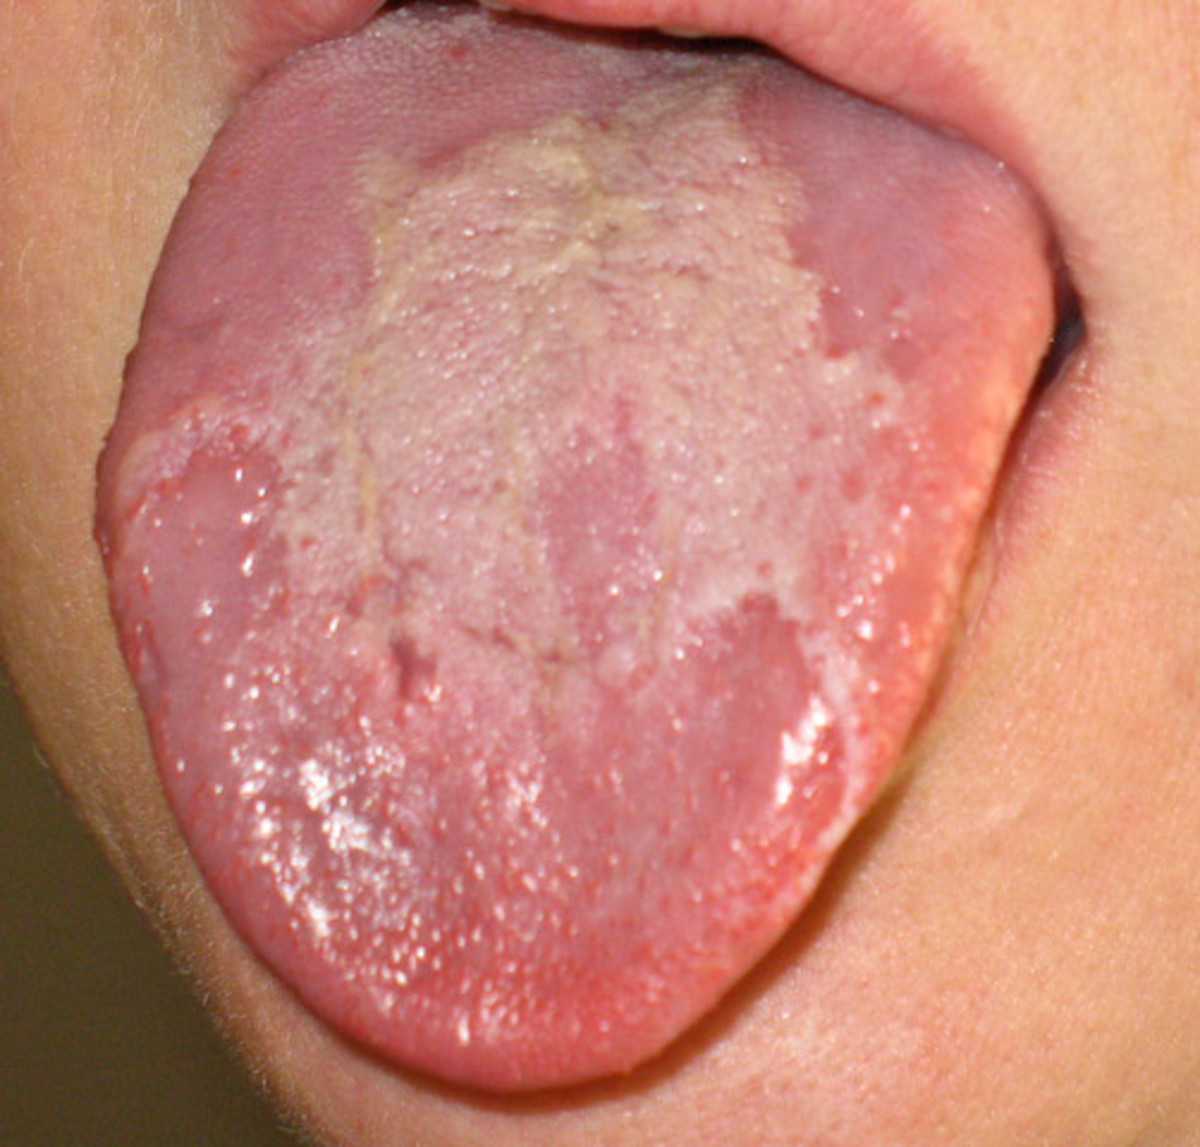 Geographic tongue shows a chronic inability to replace all of the coating and to keep the papillae in good condition.